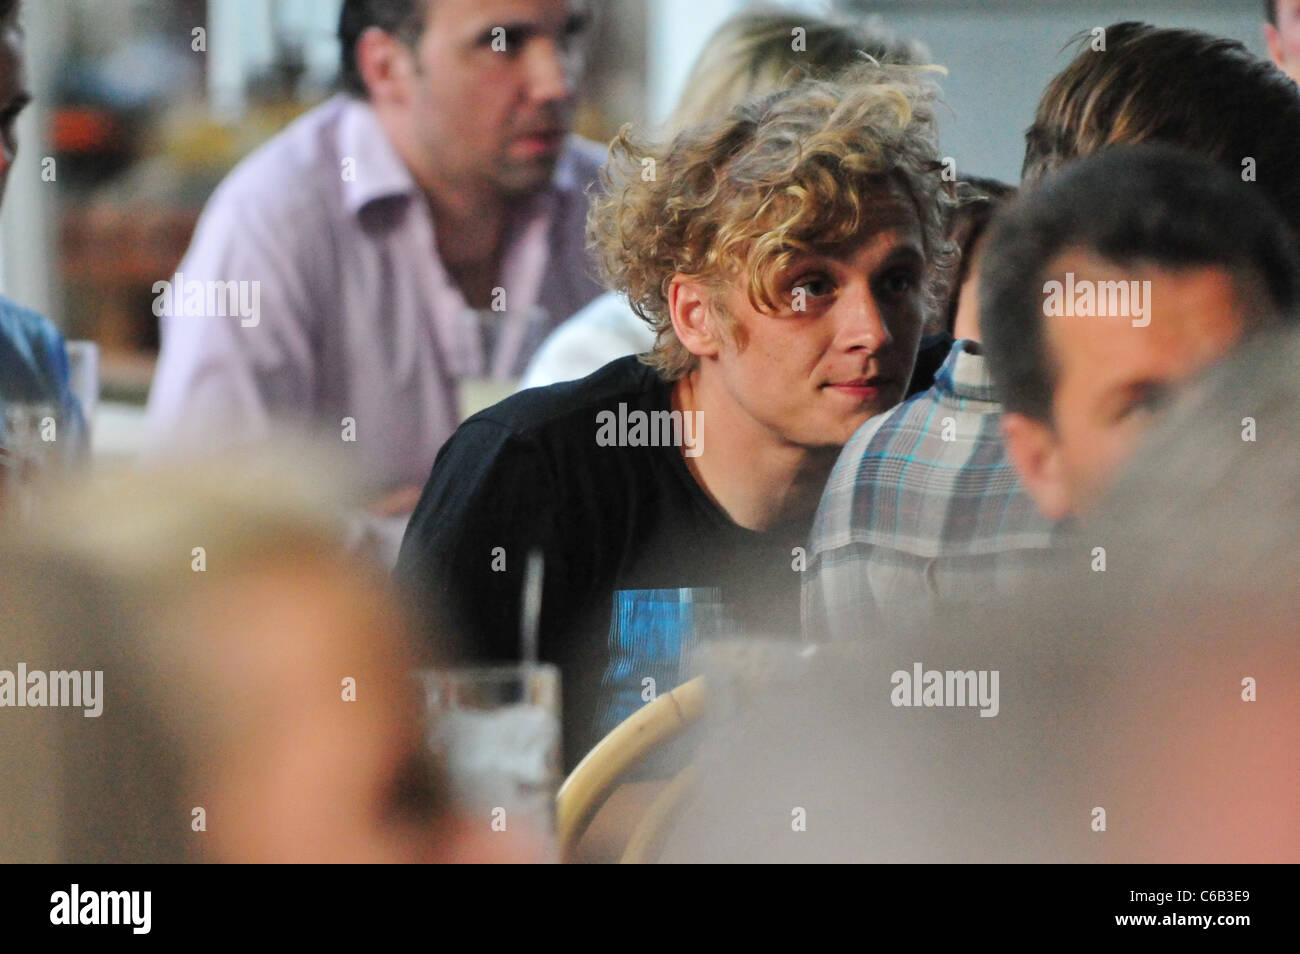 German actor Matthias Schweighoefer watching the World Cup 2010 semi finale between Germany and Spain at Cafe am neuen See Stock Photo